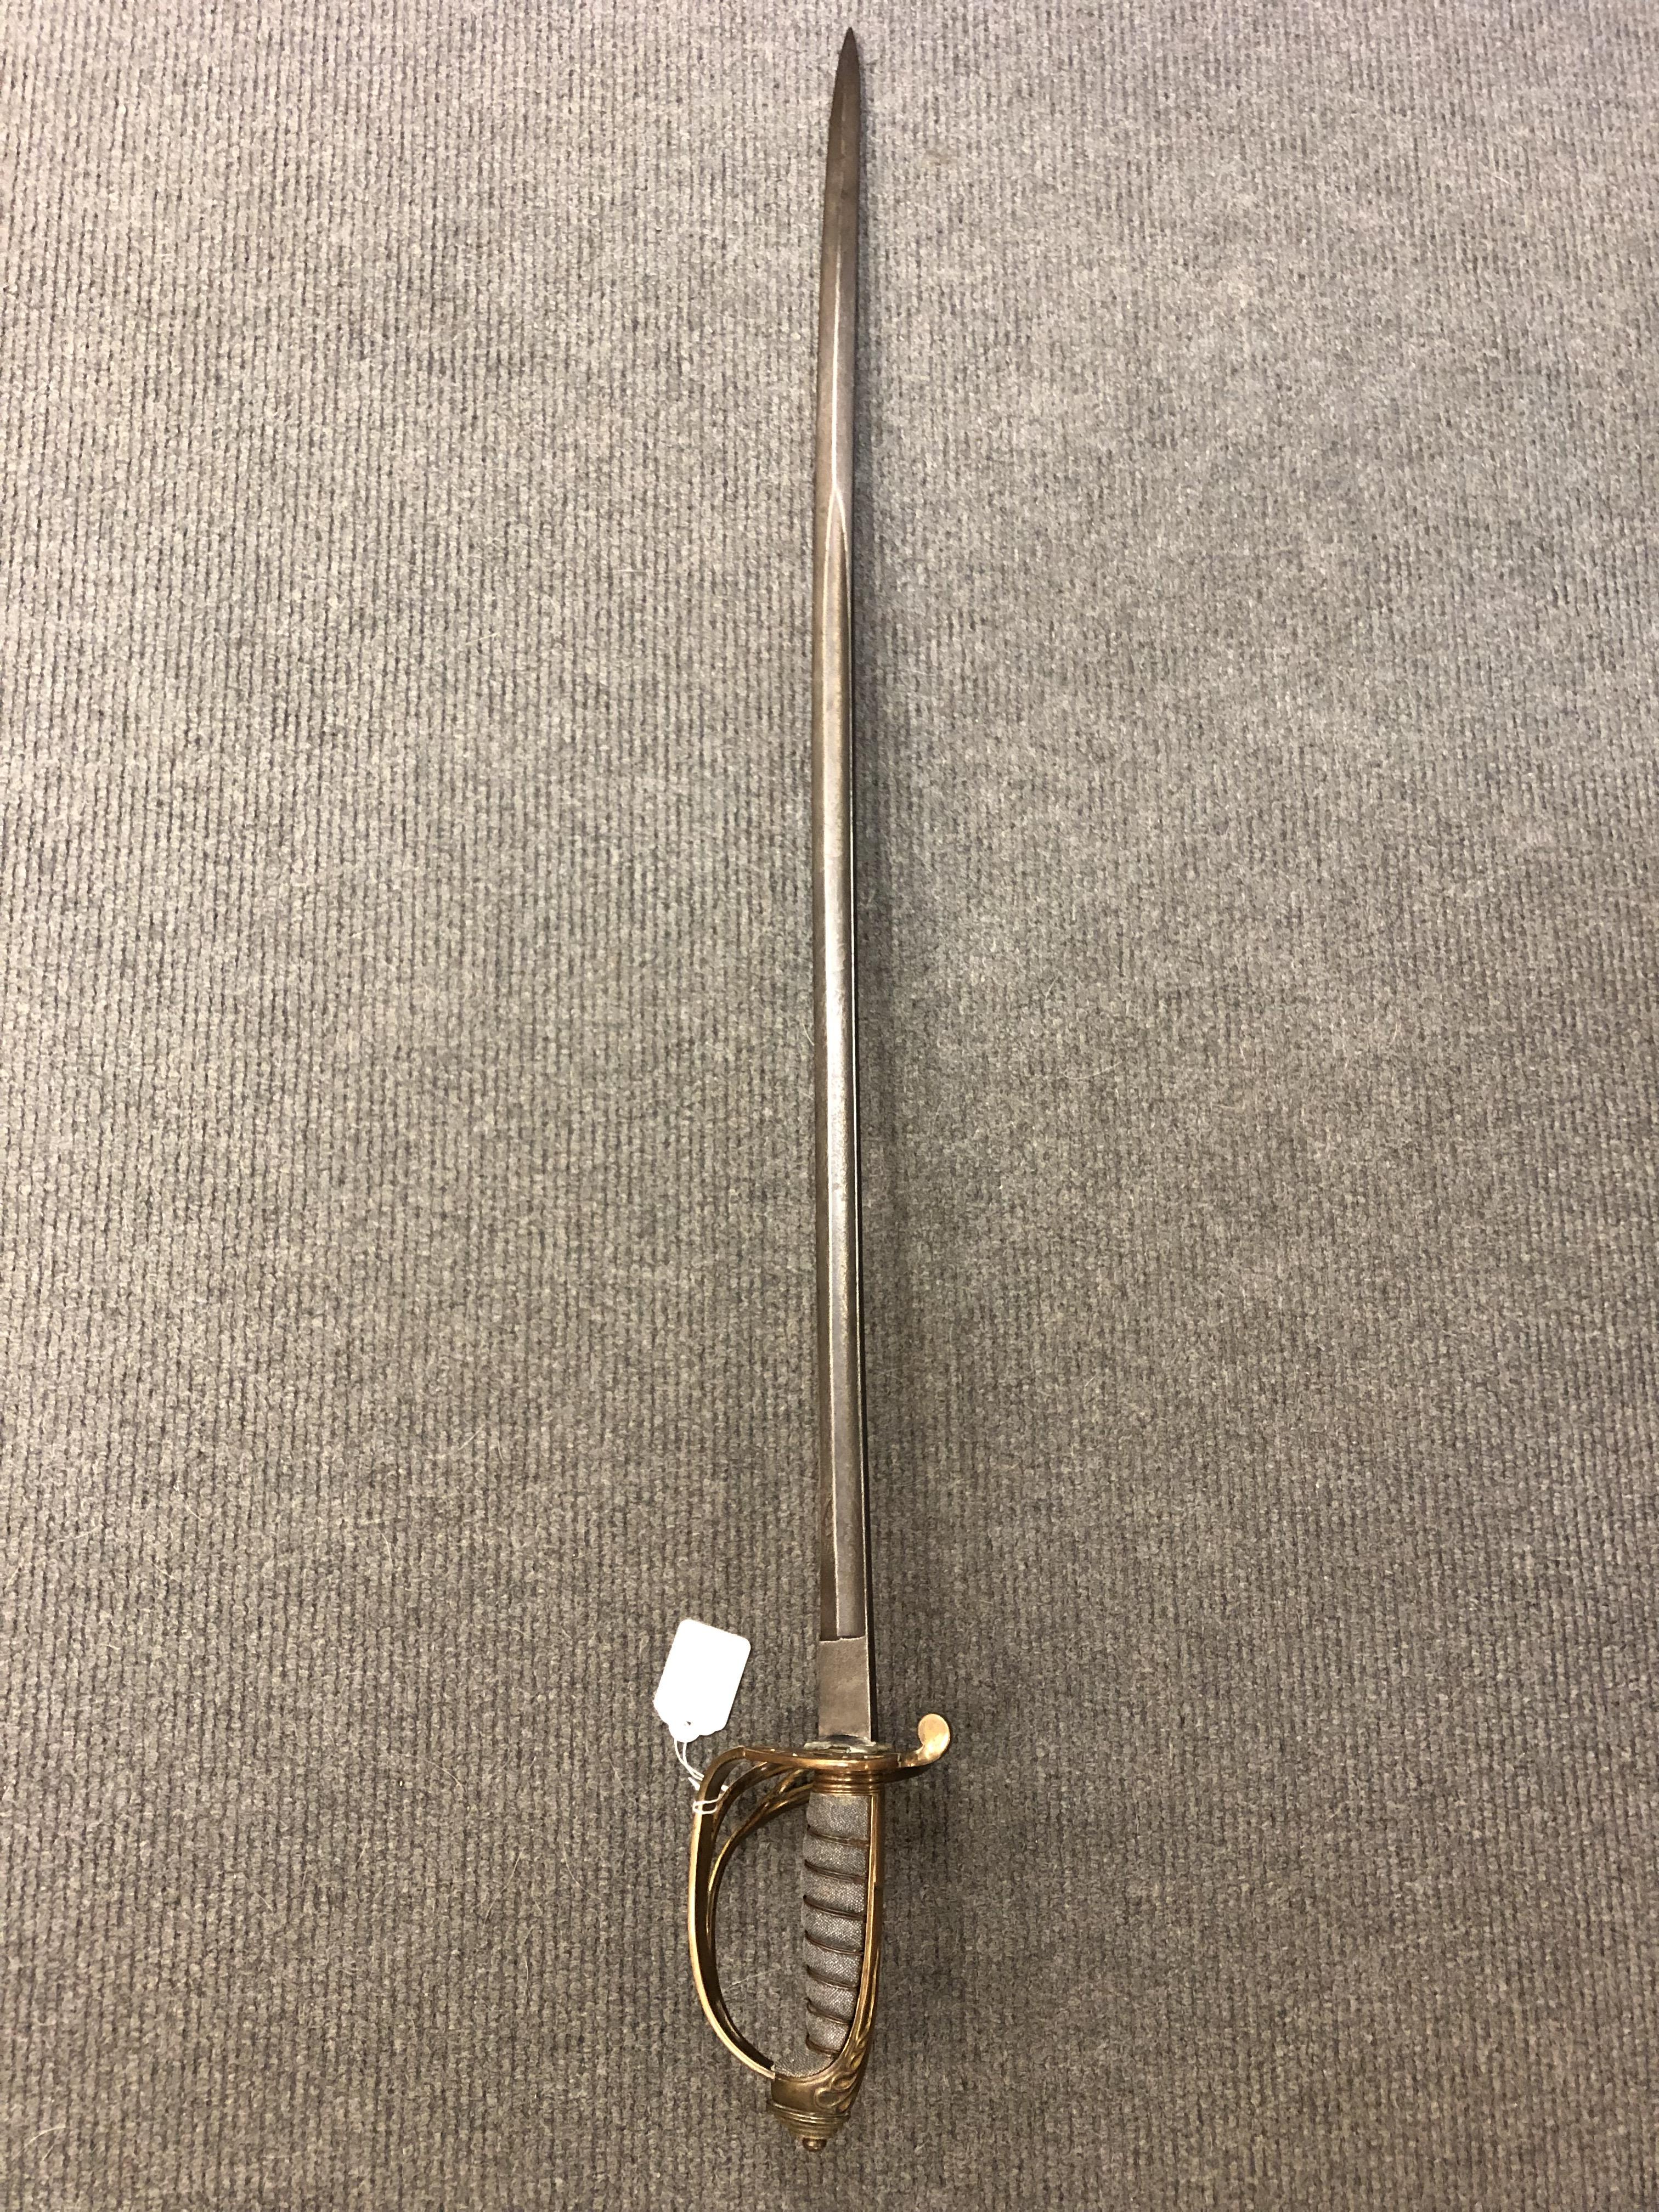 A Victorian 1822 pattern infantry officer's sword, lacks scabbard.